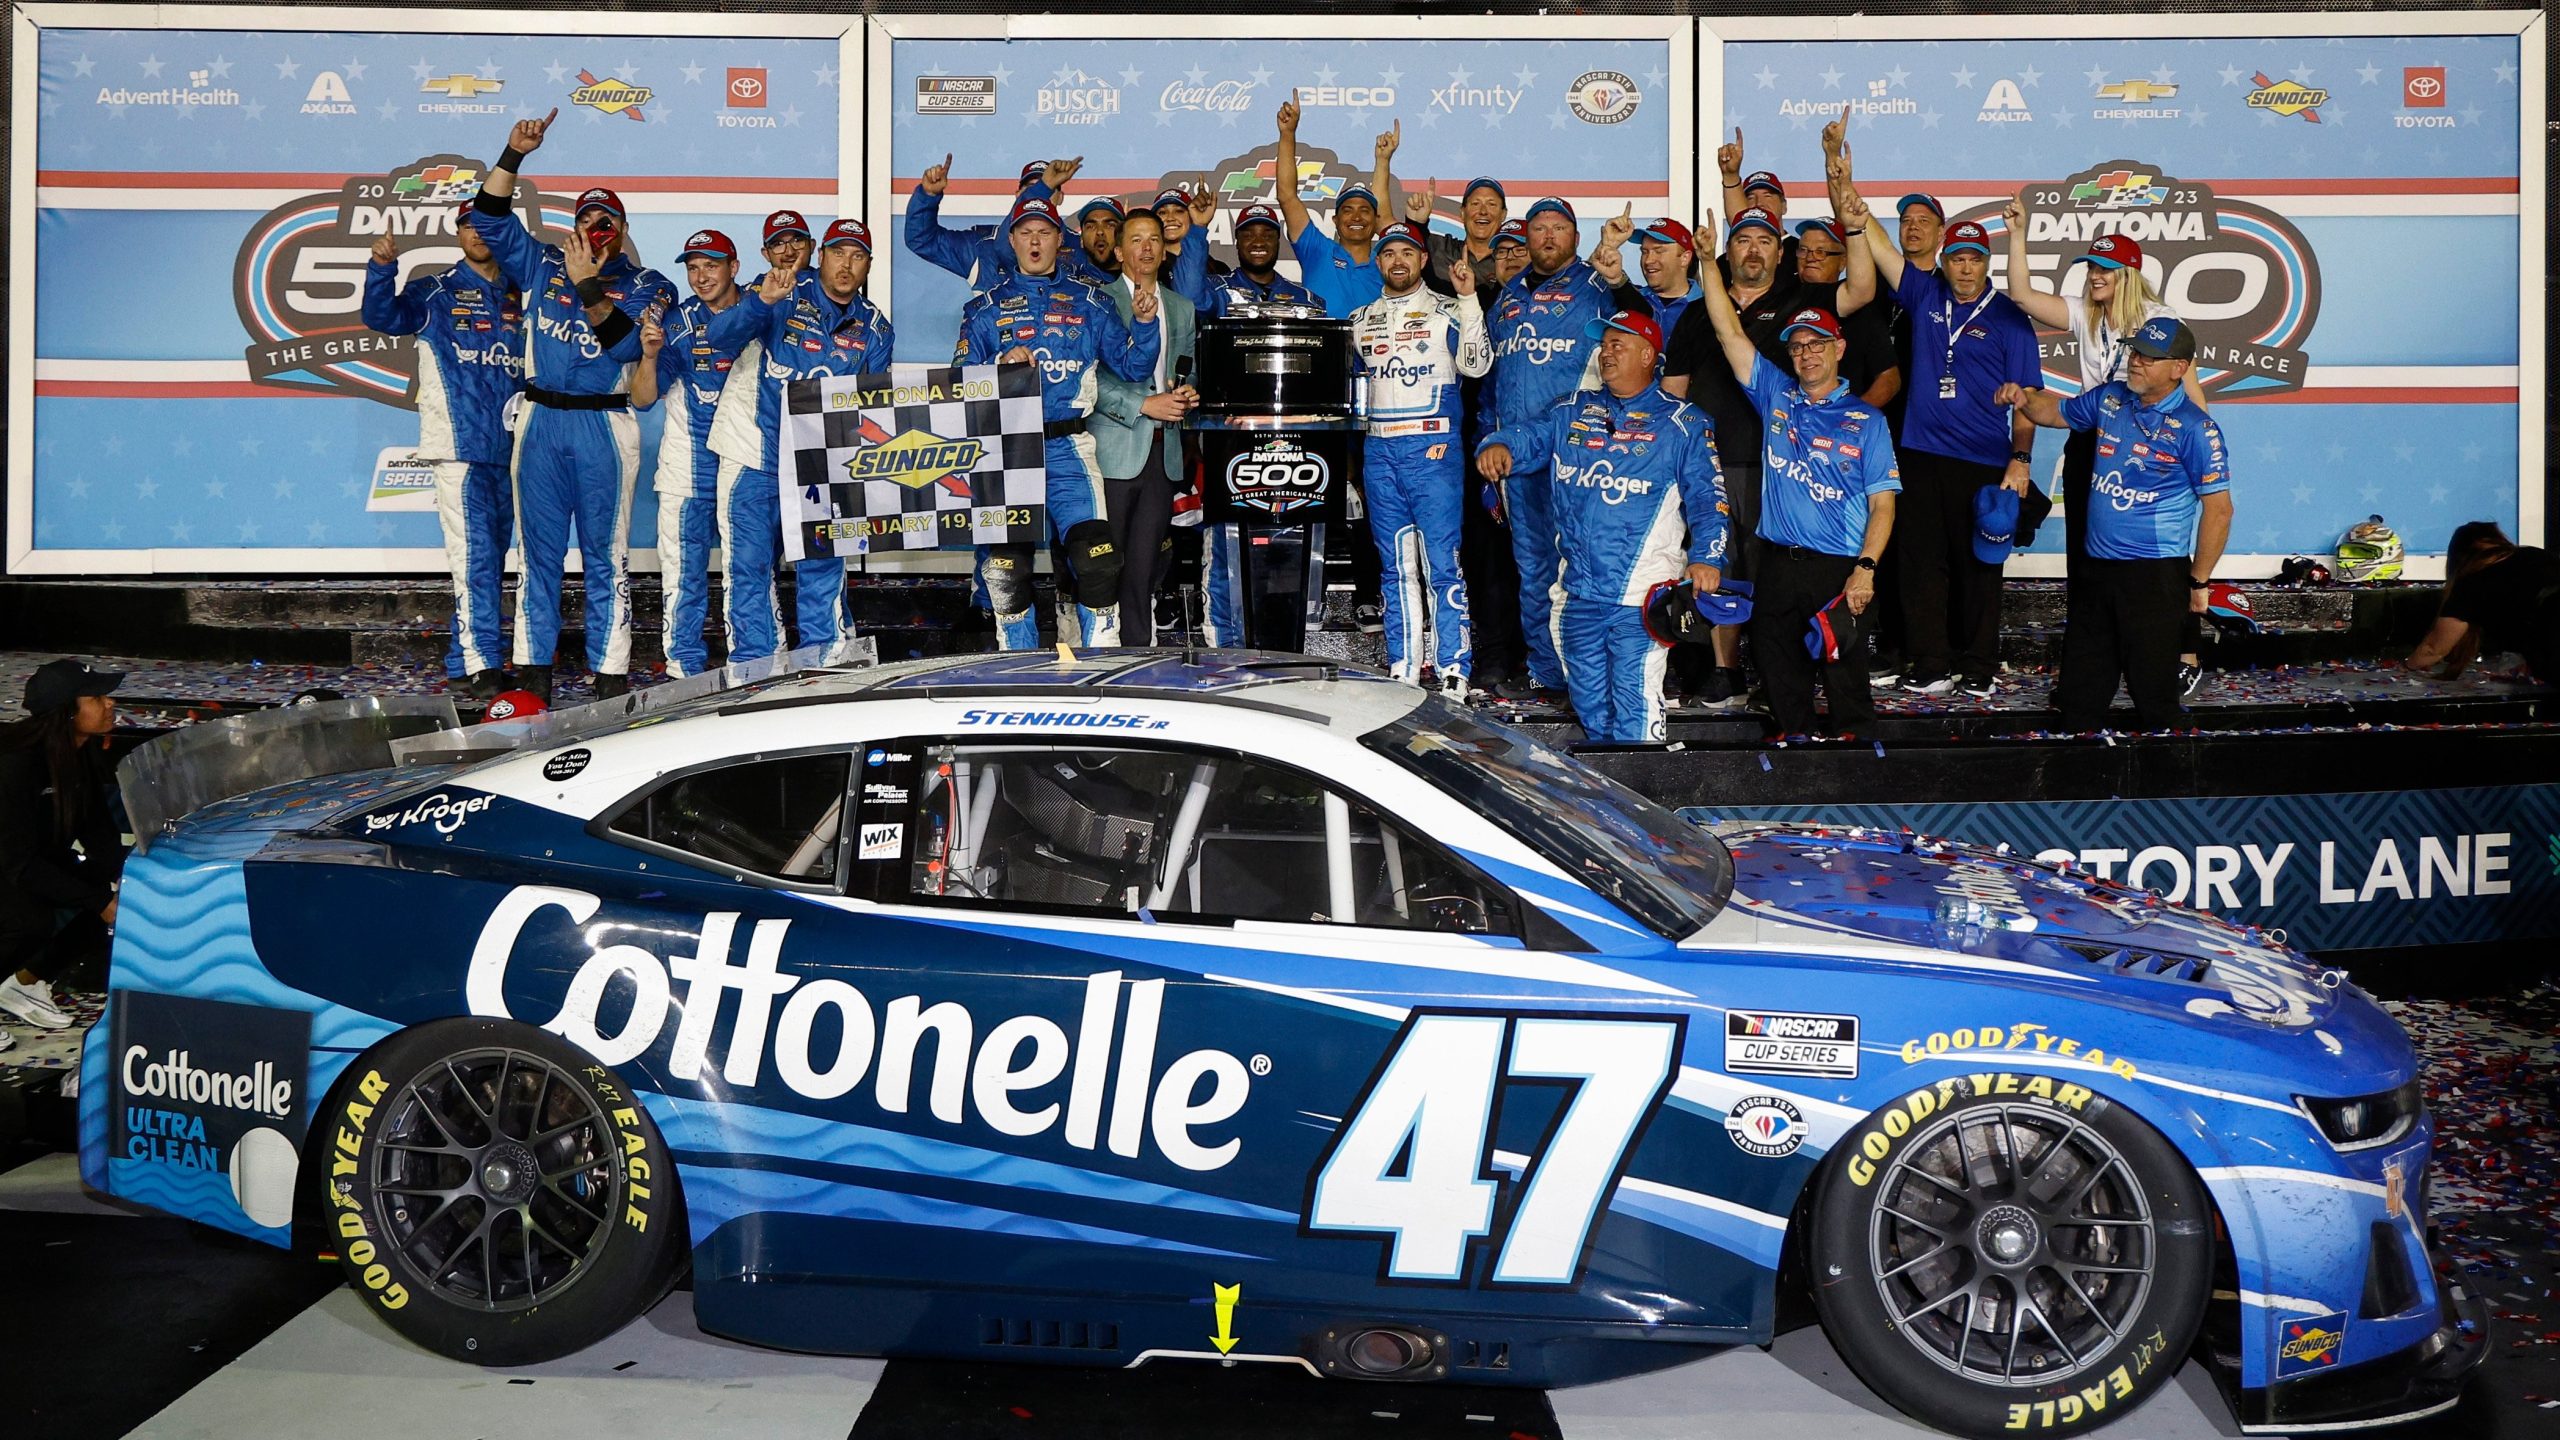 Ricky Stenhouse Jr., driver of the #47 Kroger/Cottonelle Chevrolet, and crew celebrate in victory lane after winning the NASCAR Cup Series 65th Annual Daytona 500 at Daytona International Speedway on February 19, 2023 in Daytona Beach, Florida. (Photo by Chris Graythen/Getty Images)